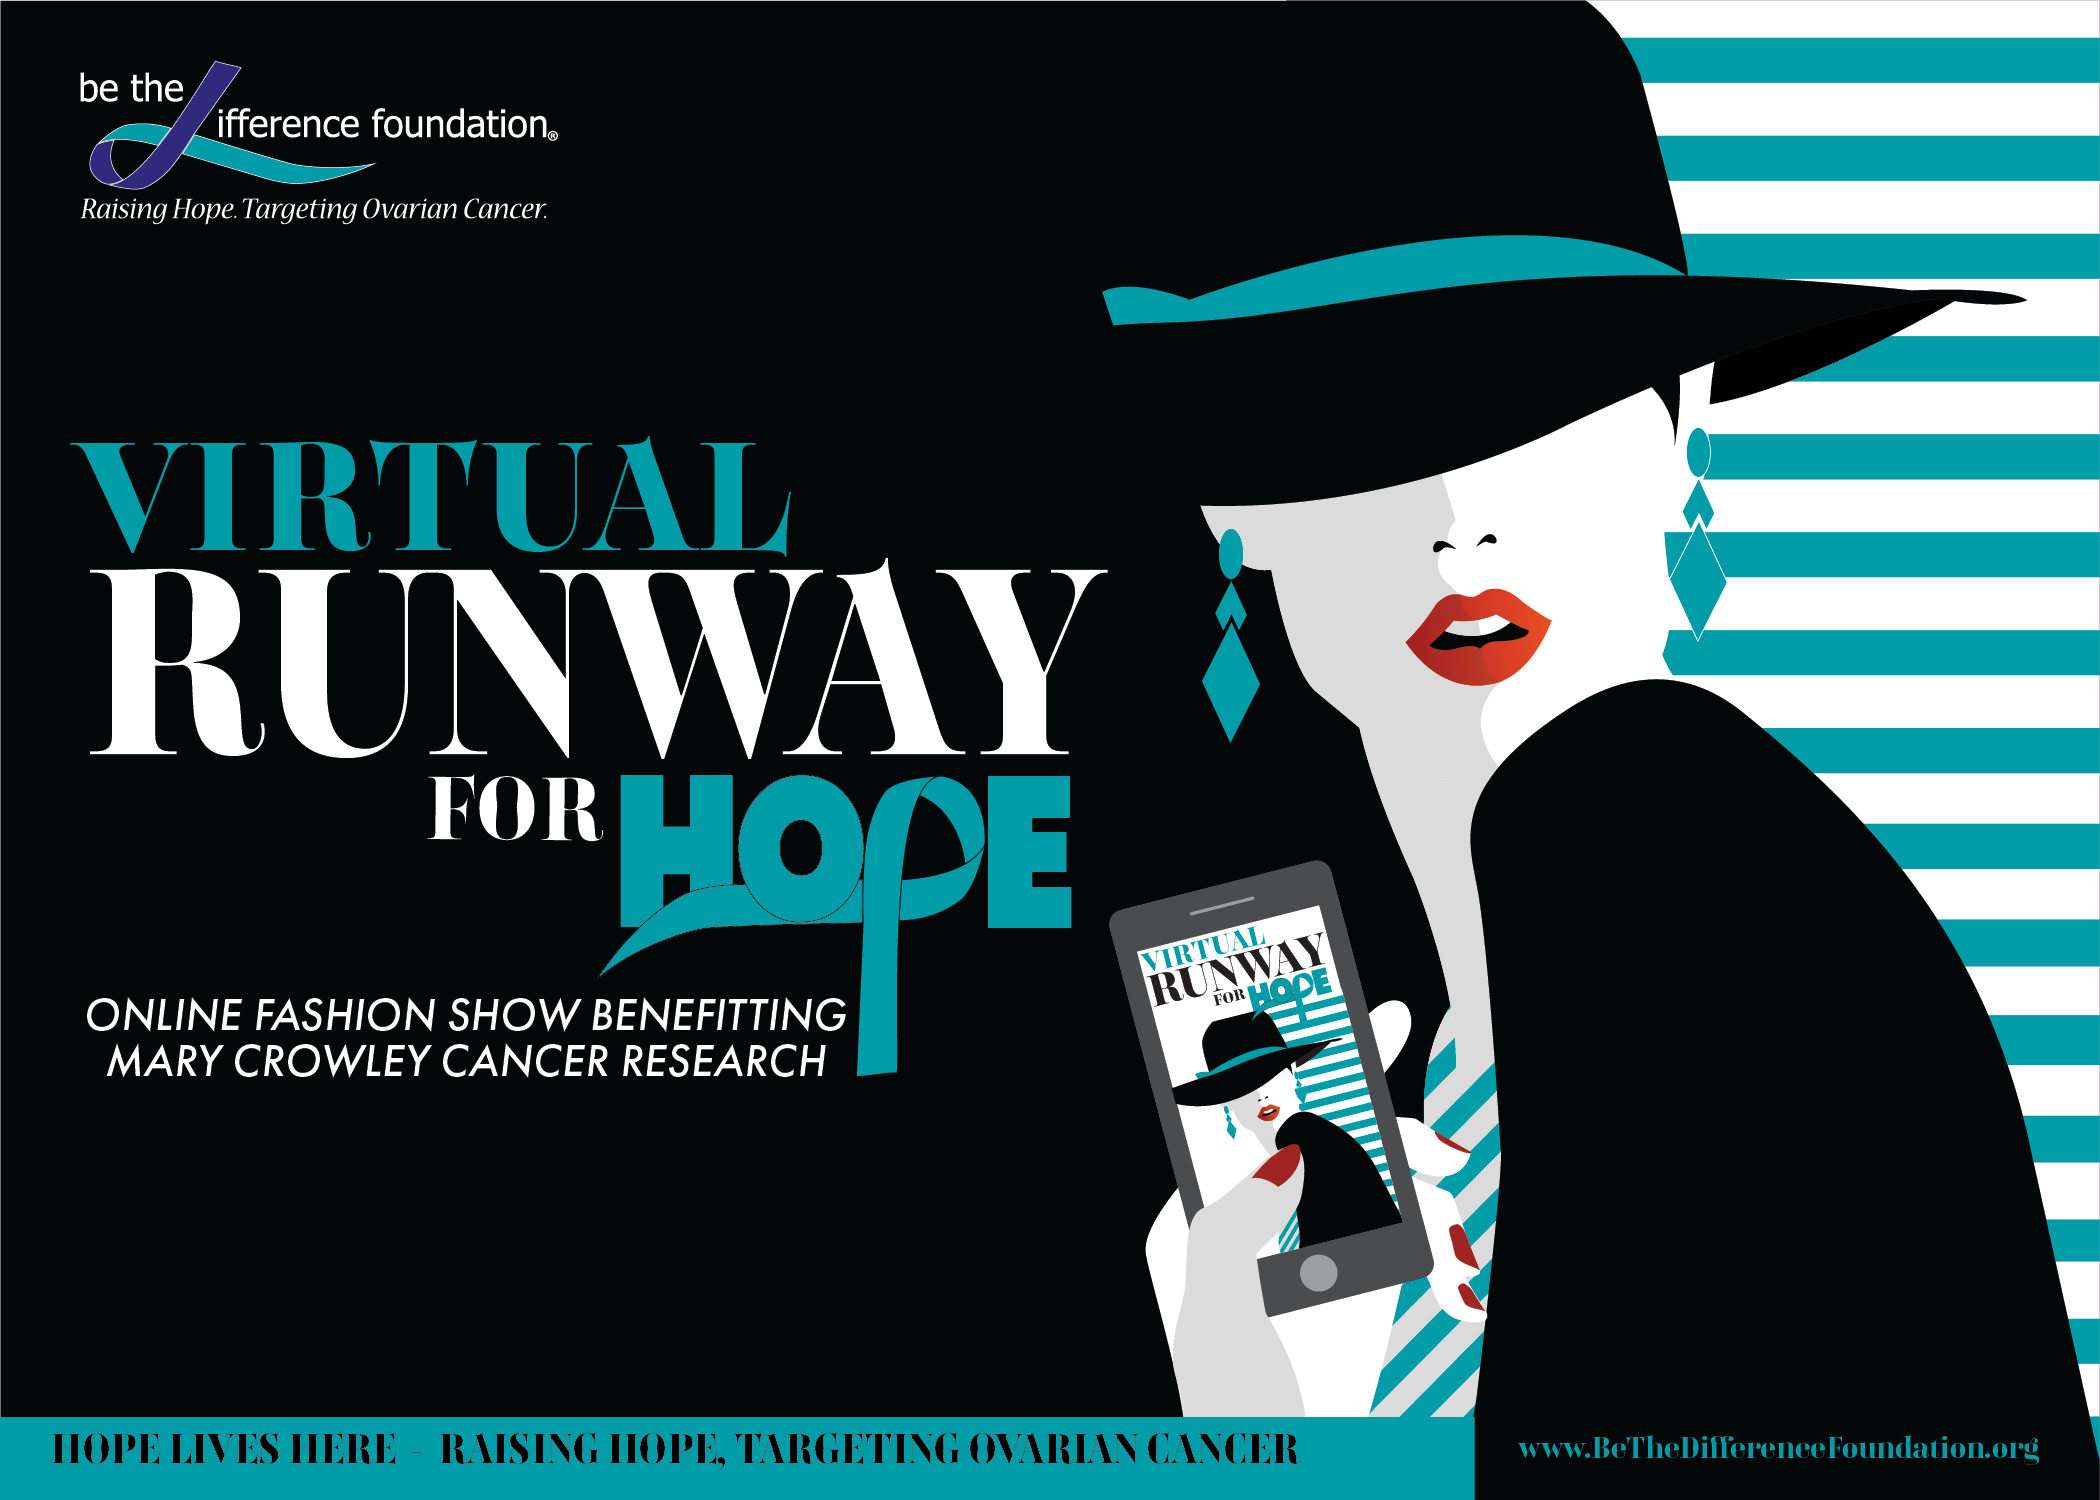 Be the Difference Foundation Presents the Second Annual Runway for Hope Fashion Show, Online This Year, Benefiting Mary Crowley Cancer Research